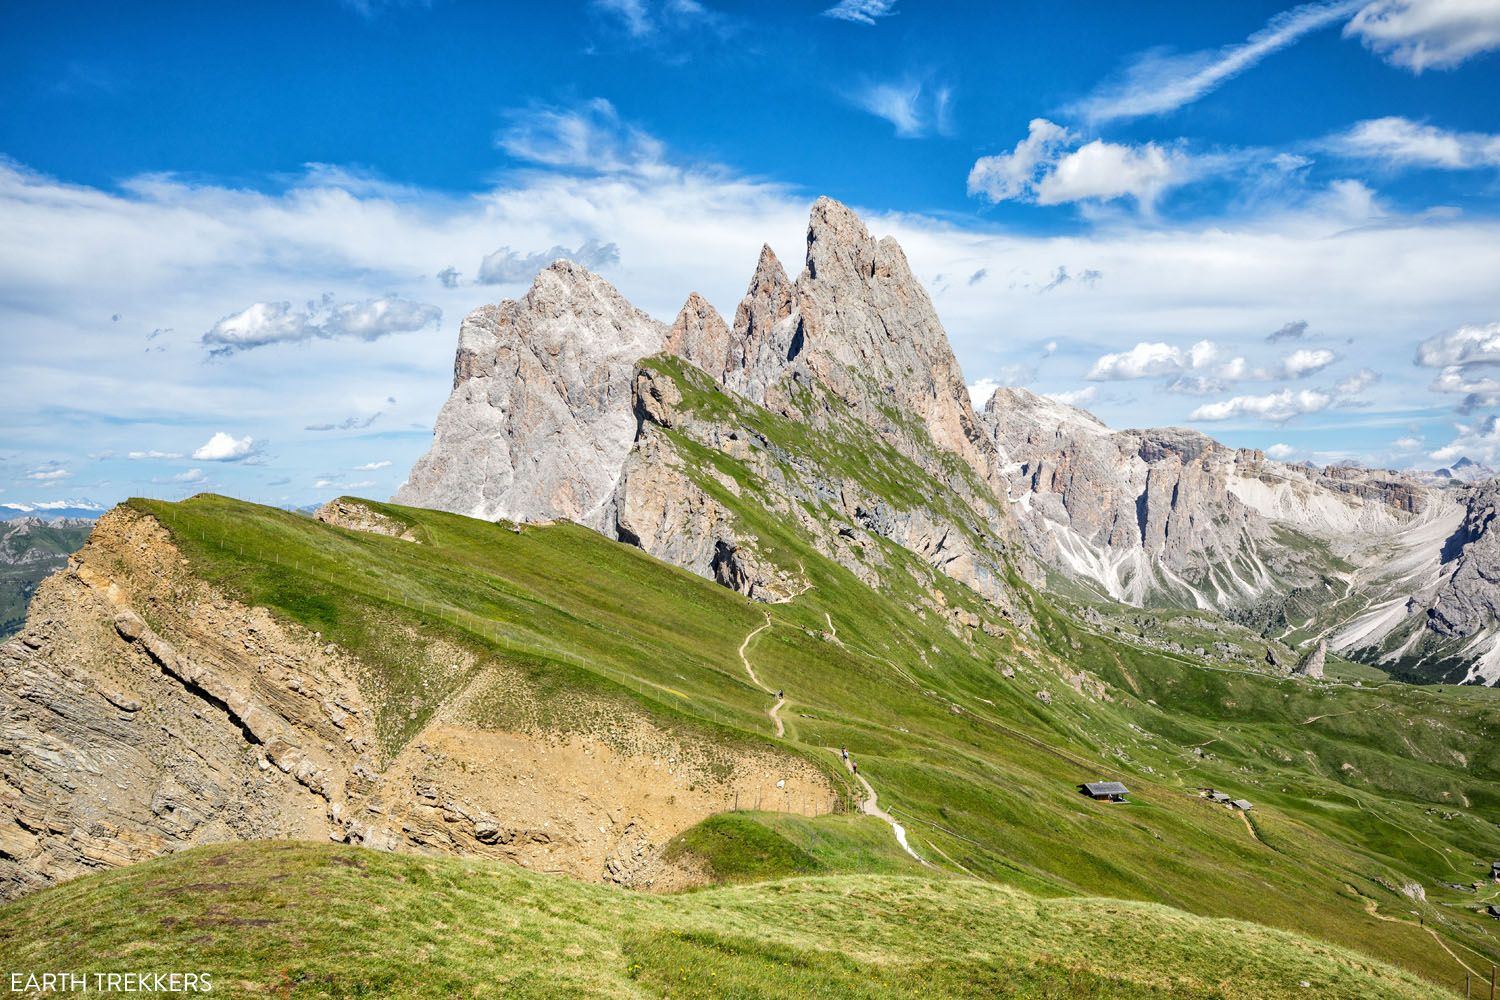 How to Get to the Seceda Viewpoint Photo